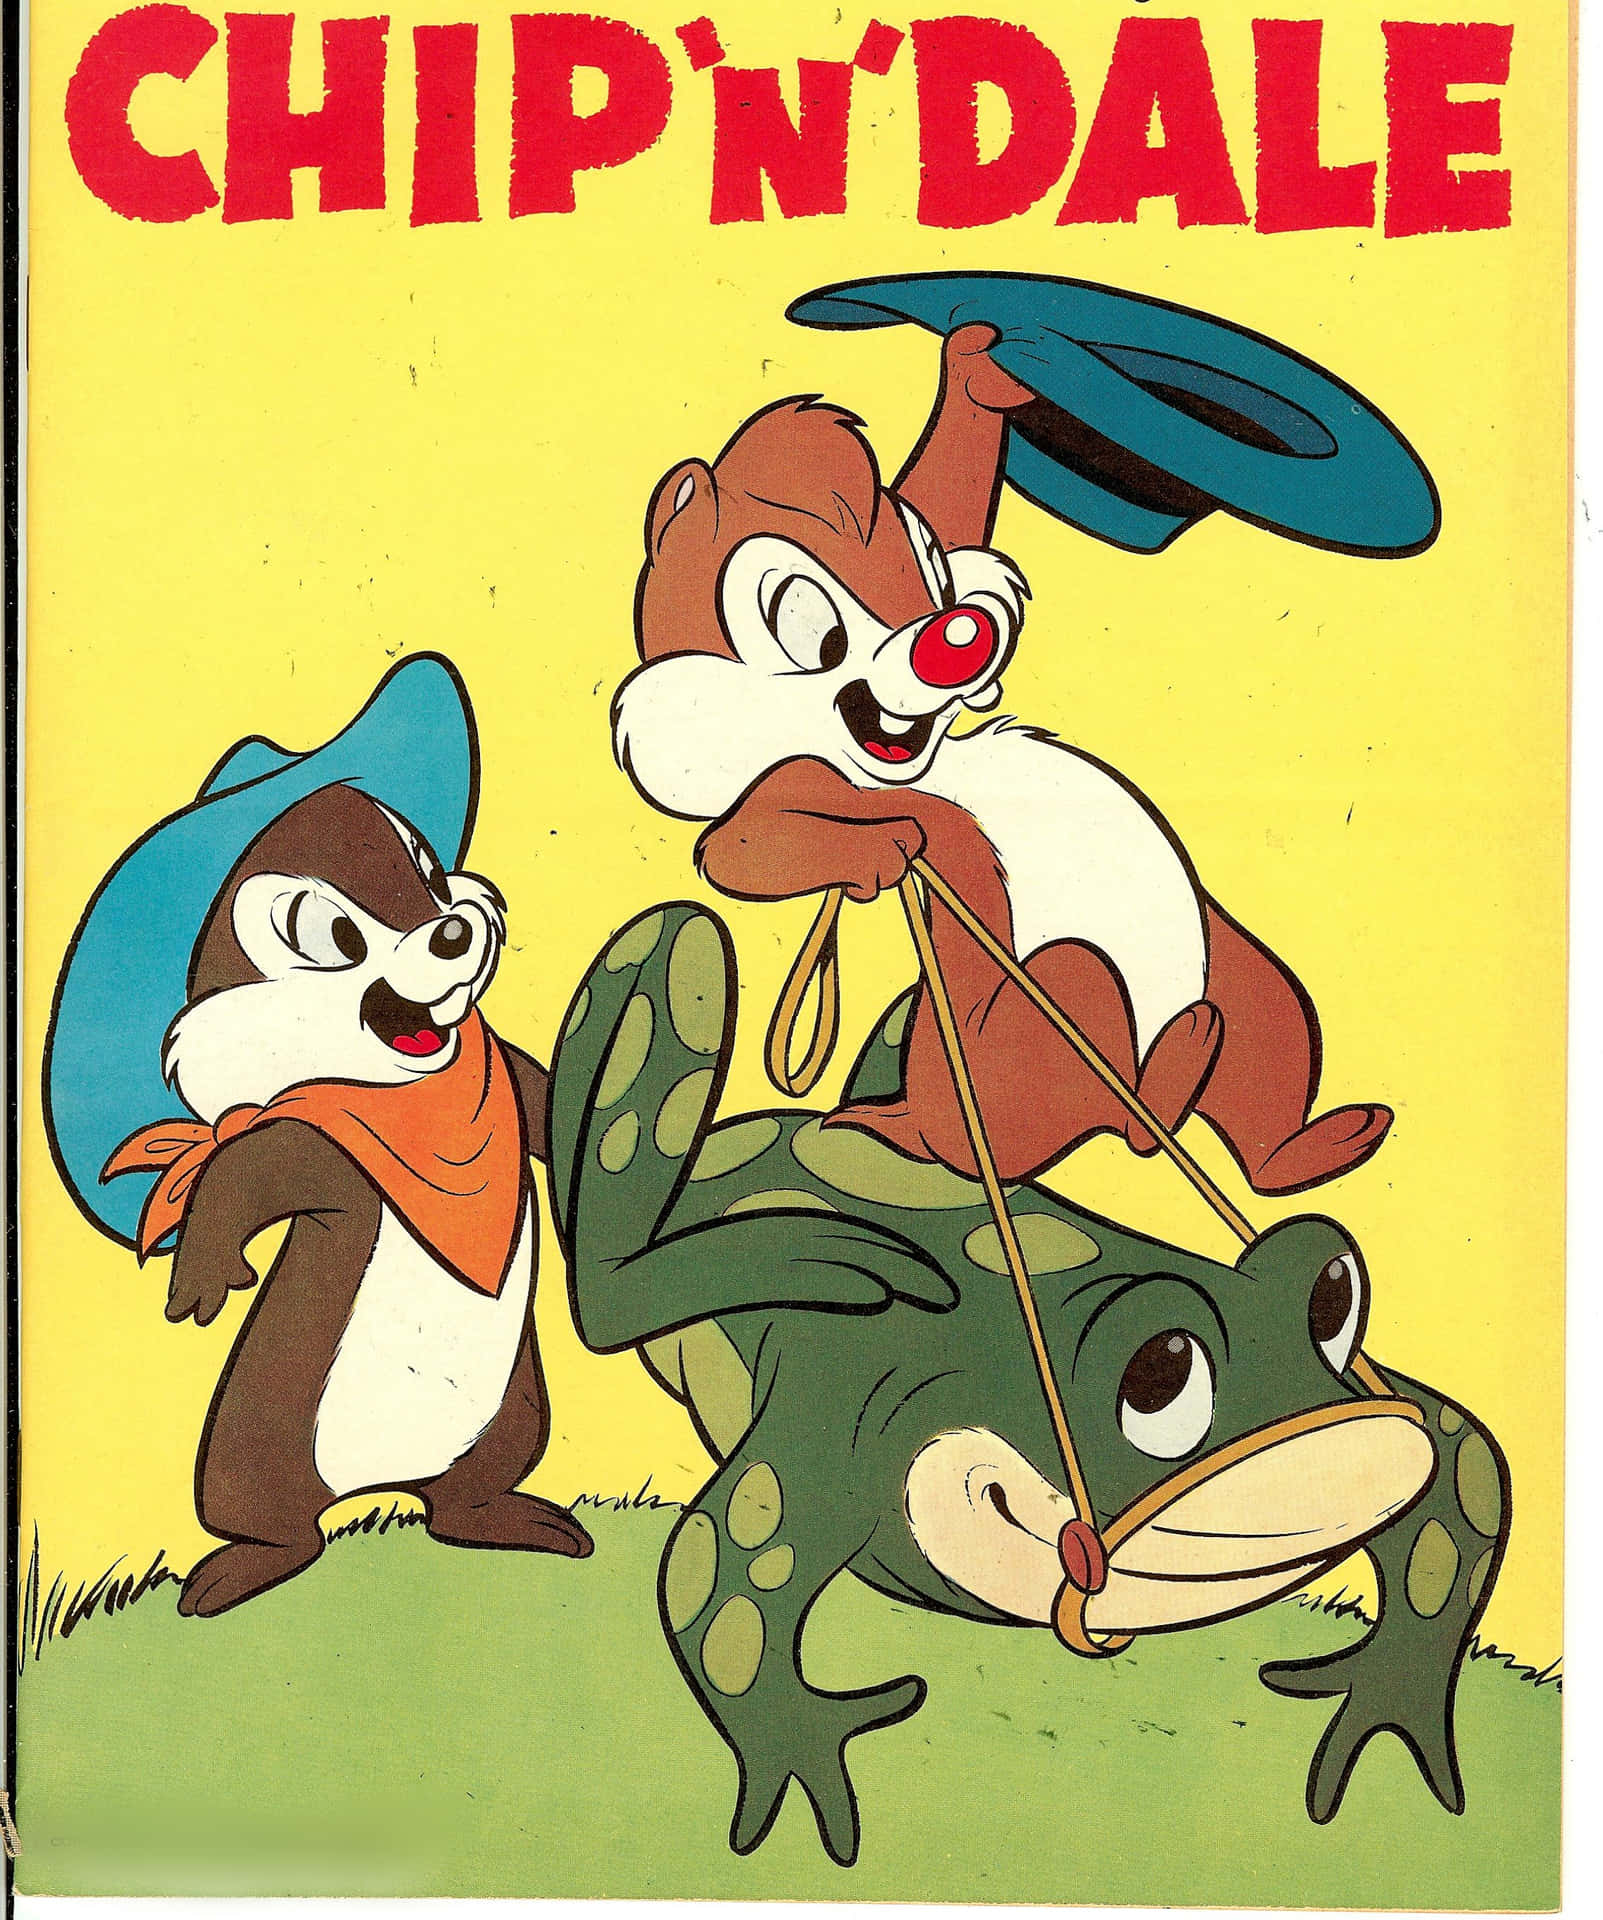 Chip and Dale - the beloved cartoon duo